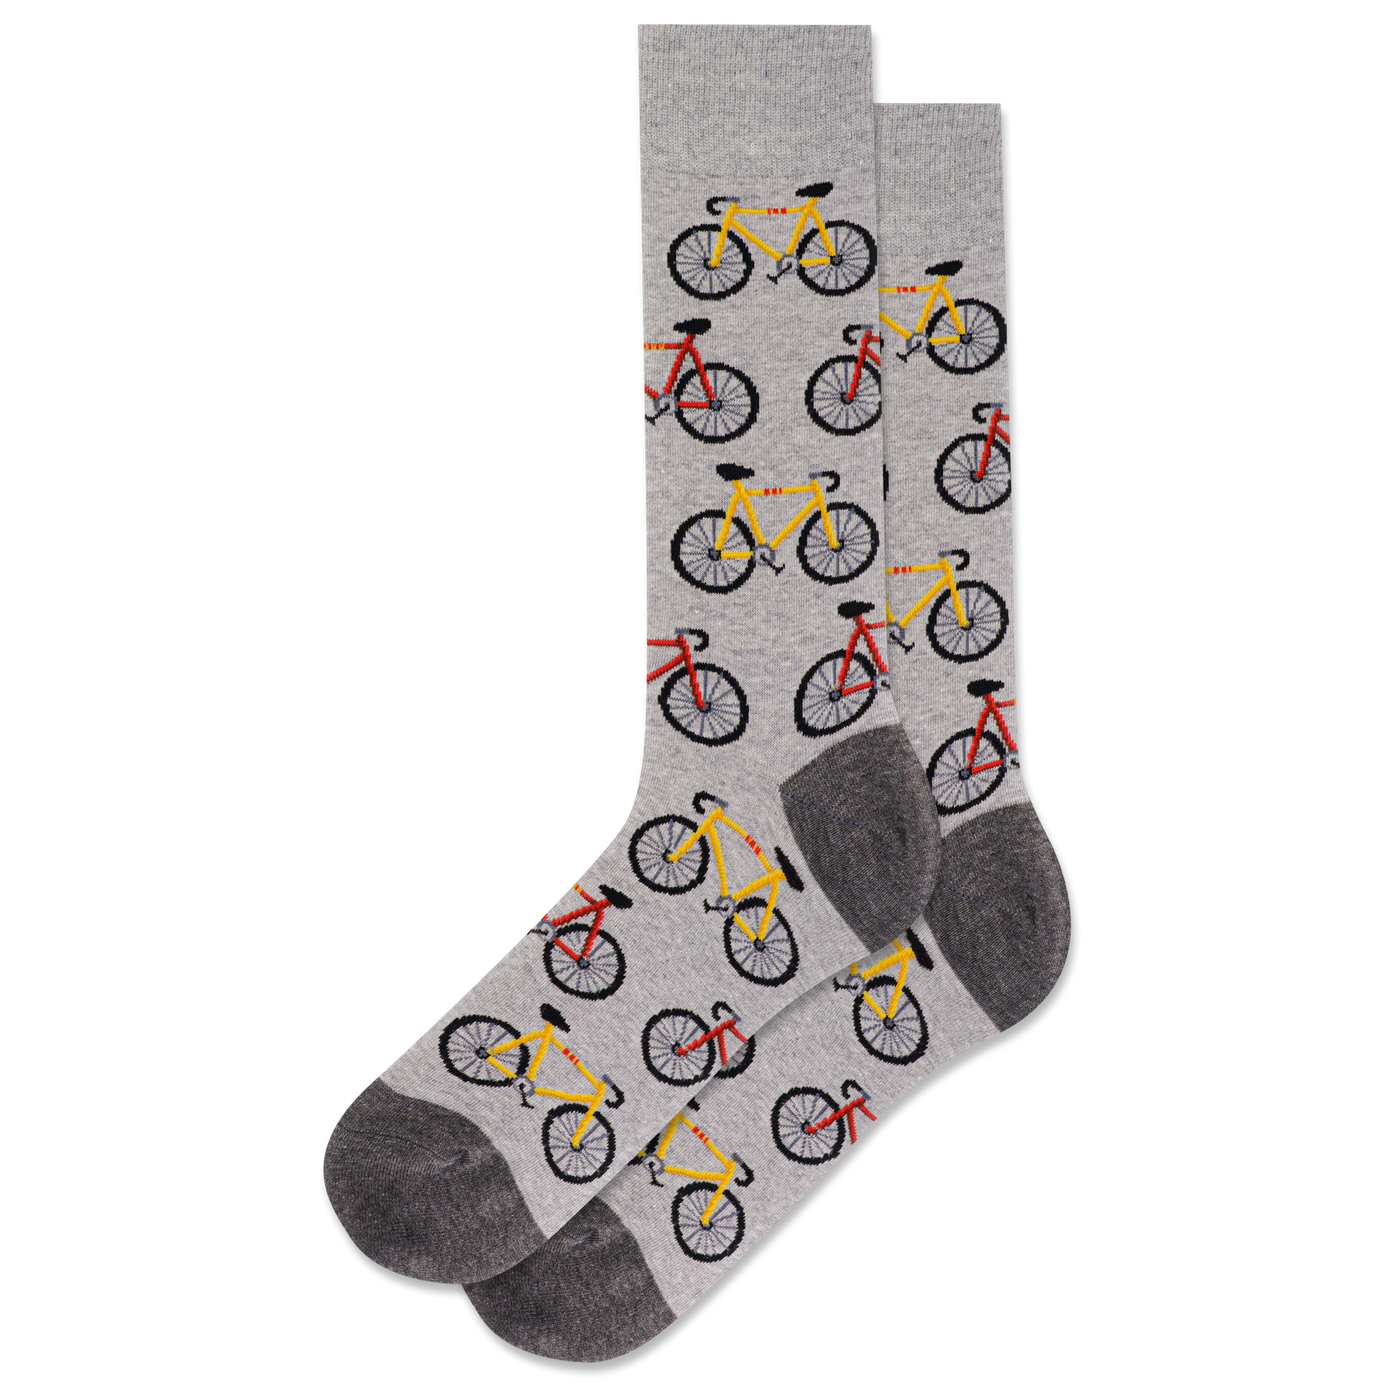 "Bicycles" Crew Socks by Hot Sox - Large